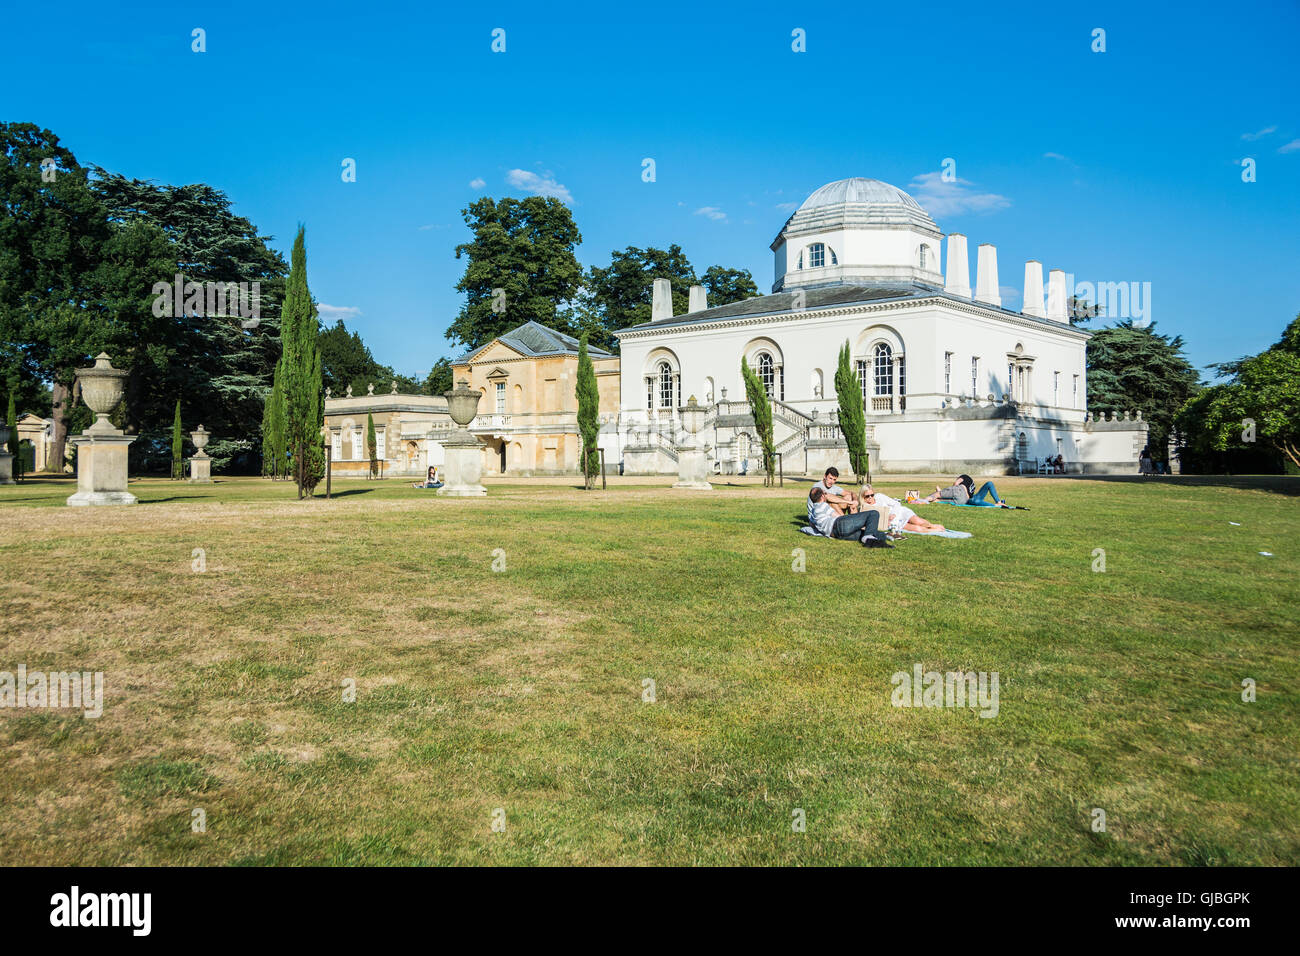 Friends relaxing in the grounds of Chiswick House, an early 18th Palladian villa in Chiswick, London, England, UK Stock Photo